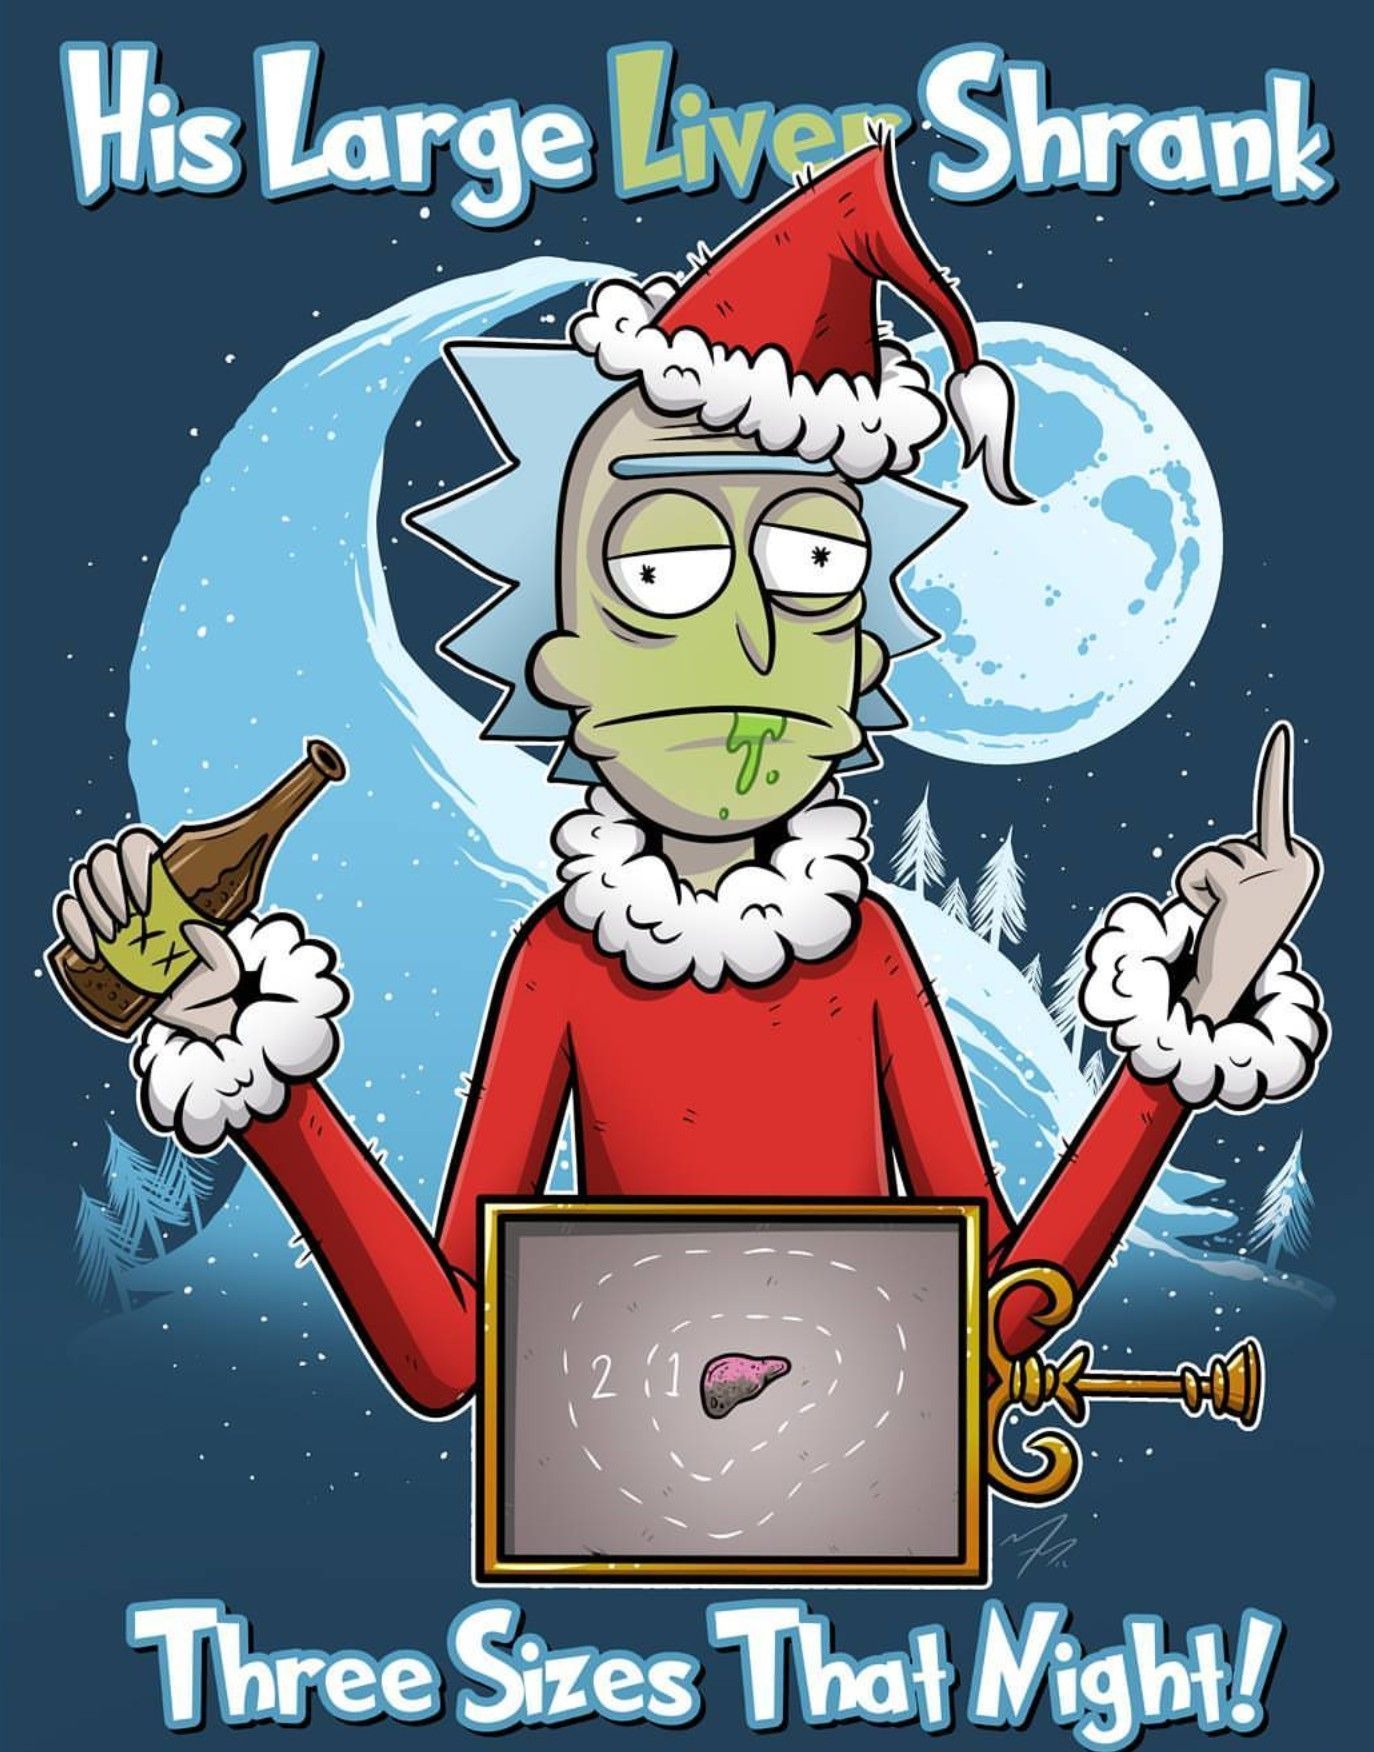 Rick and Morty • The Grinch. Rick and morty poster, Rick and morty, A christmas story